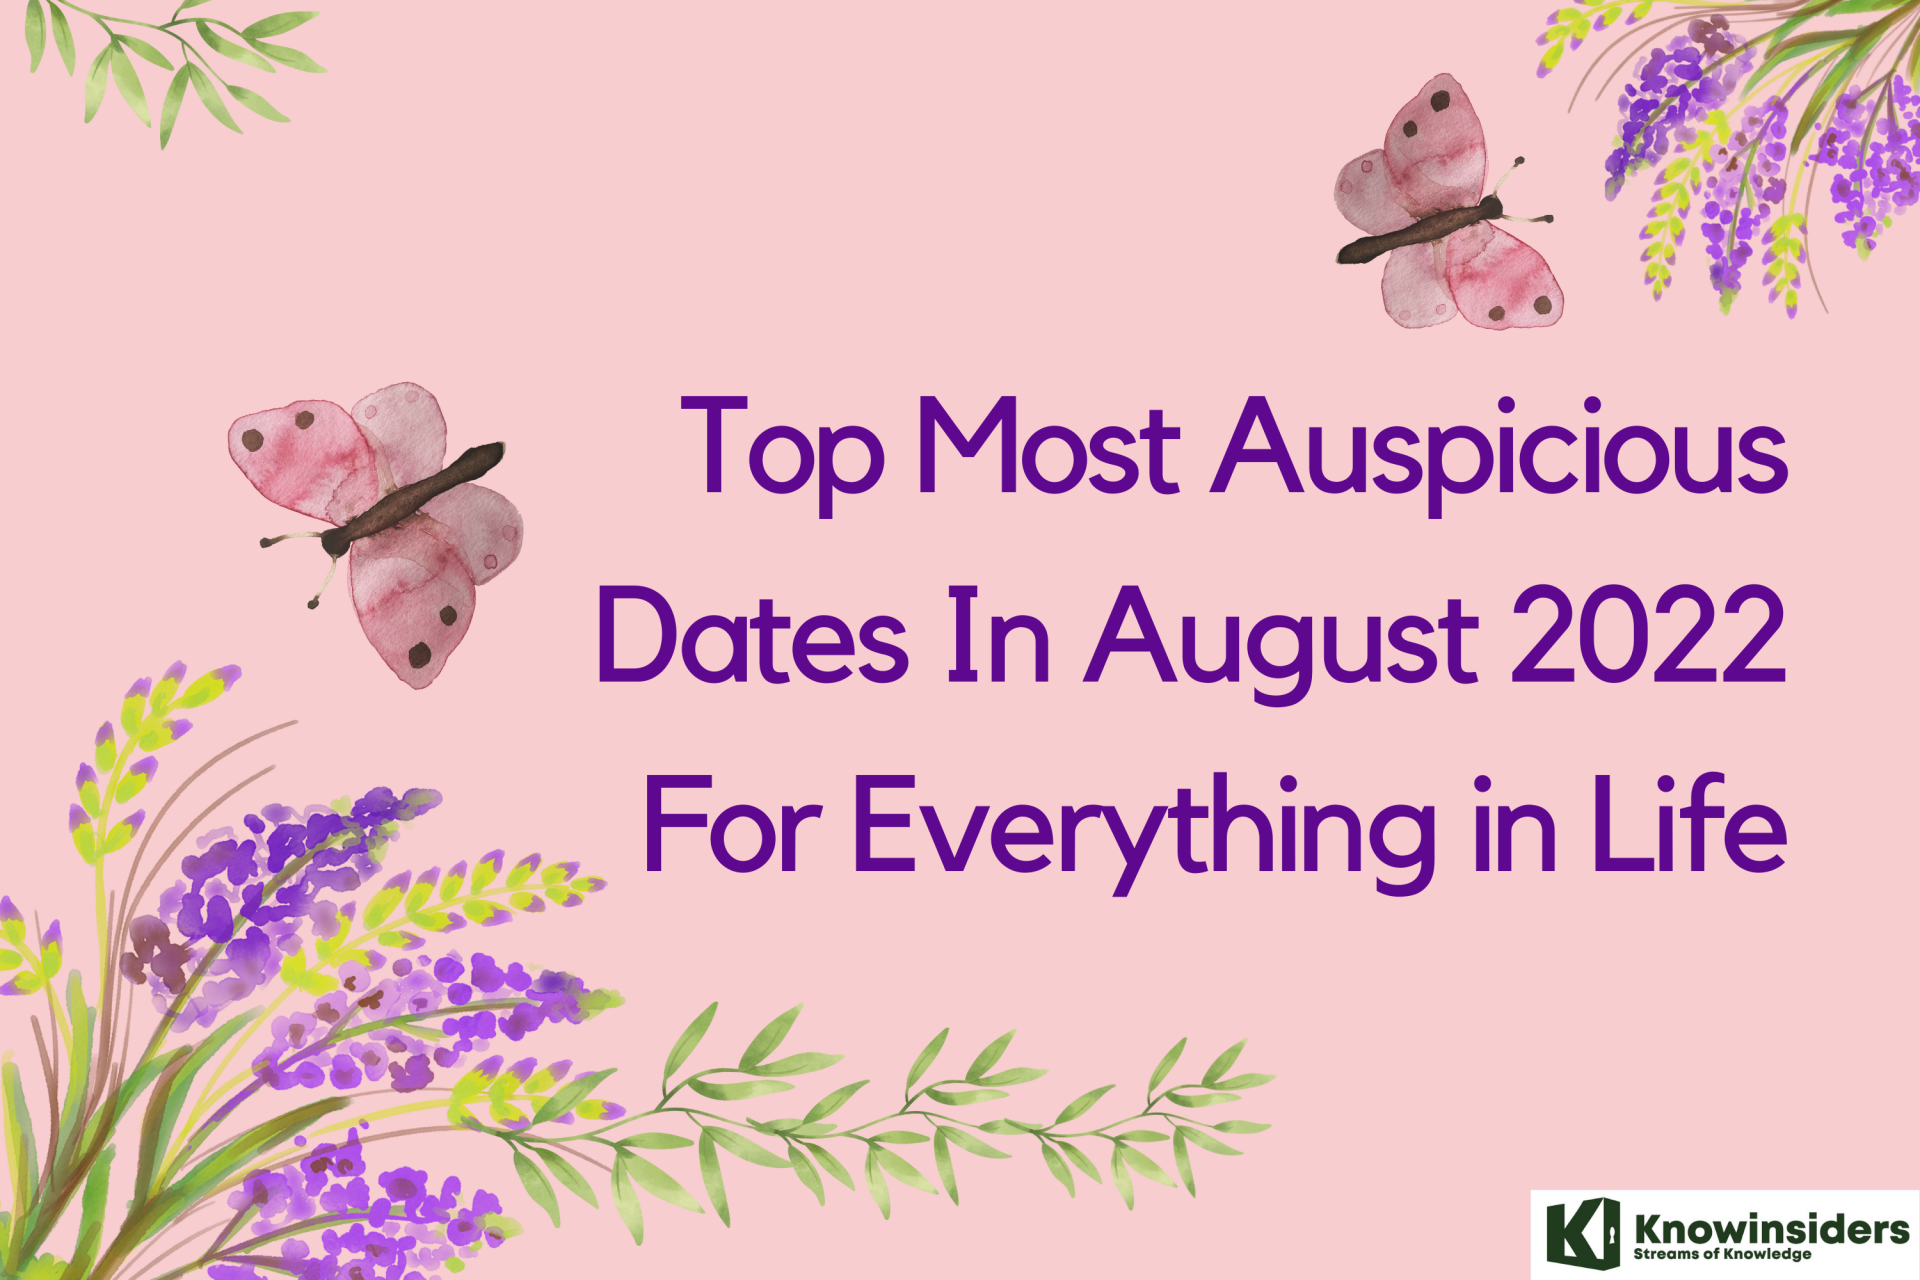 Top Most Auspicious Dates In August 2022 For Everything in Life